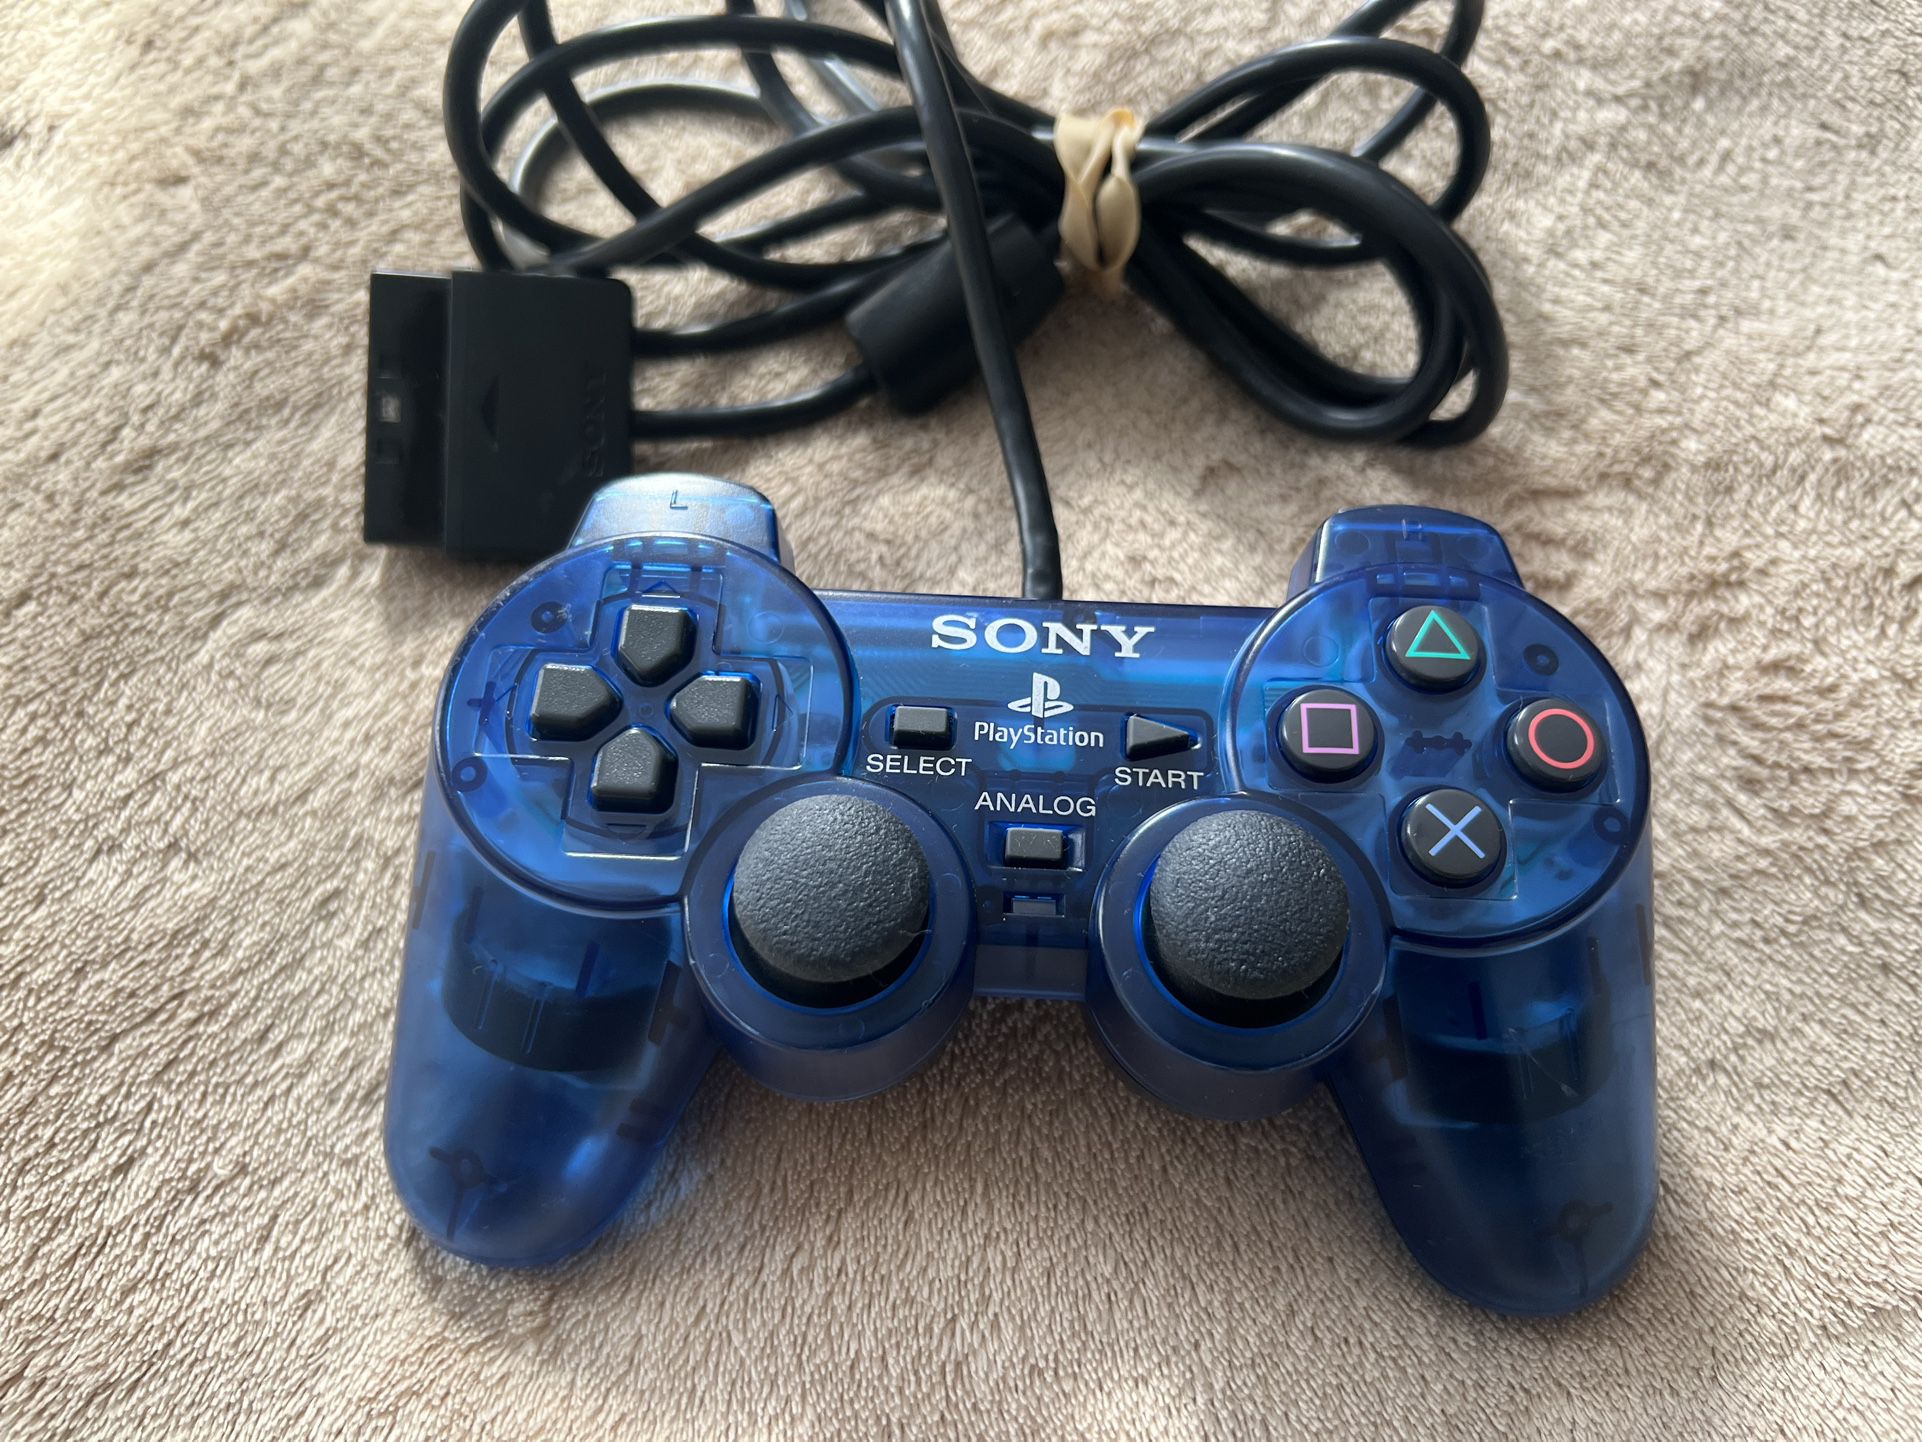 Sony Playstation 2 Dualshock 2 Clear Blue Analog Controller for Sale in Queens, NY - OfferUp